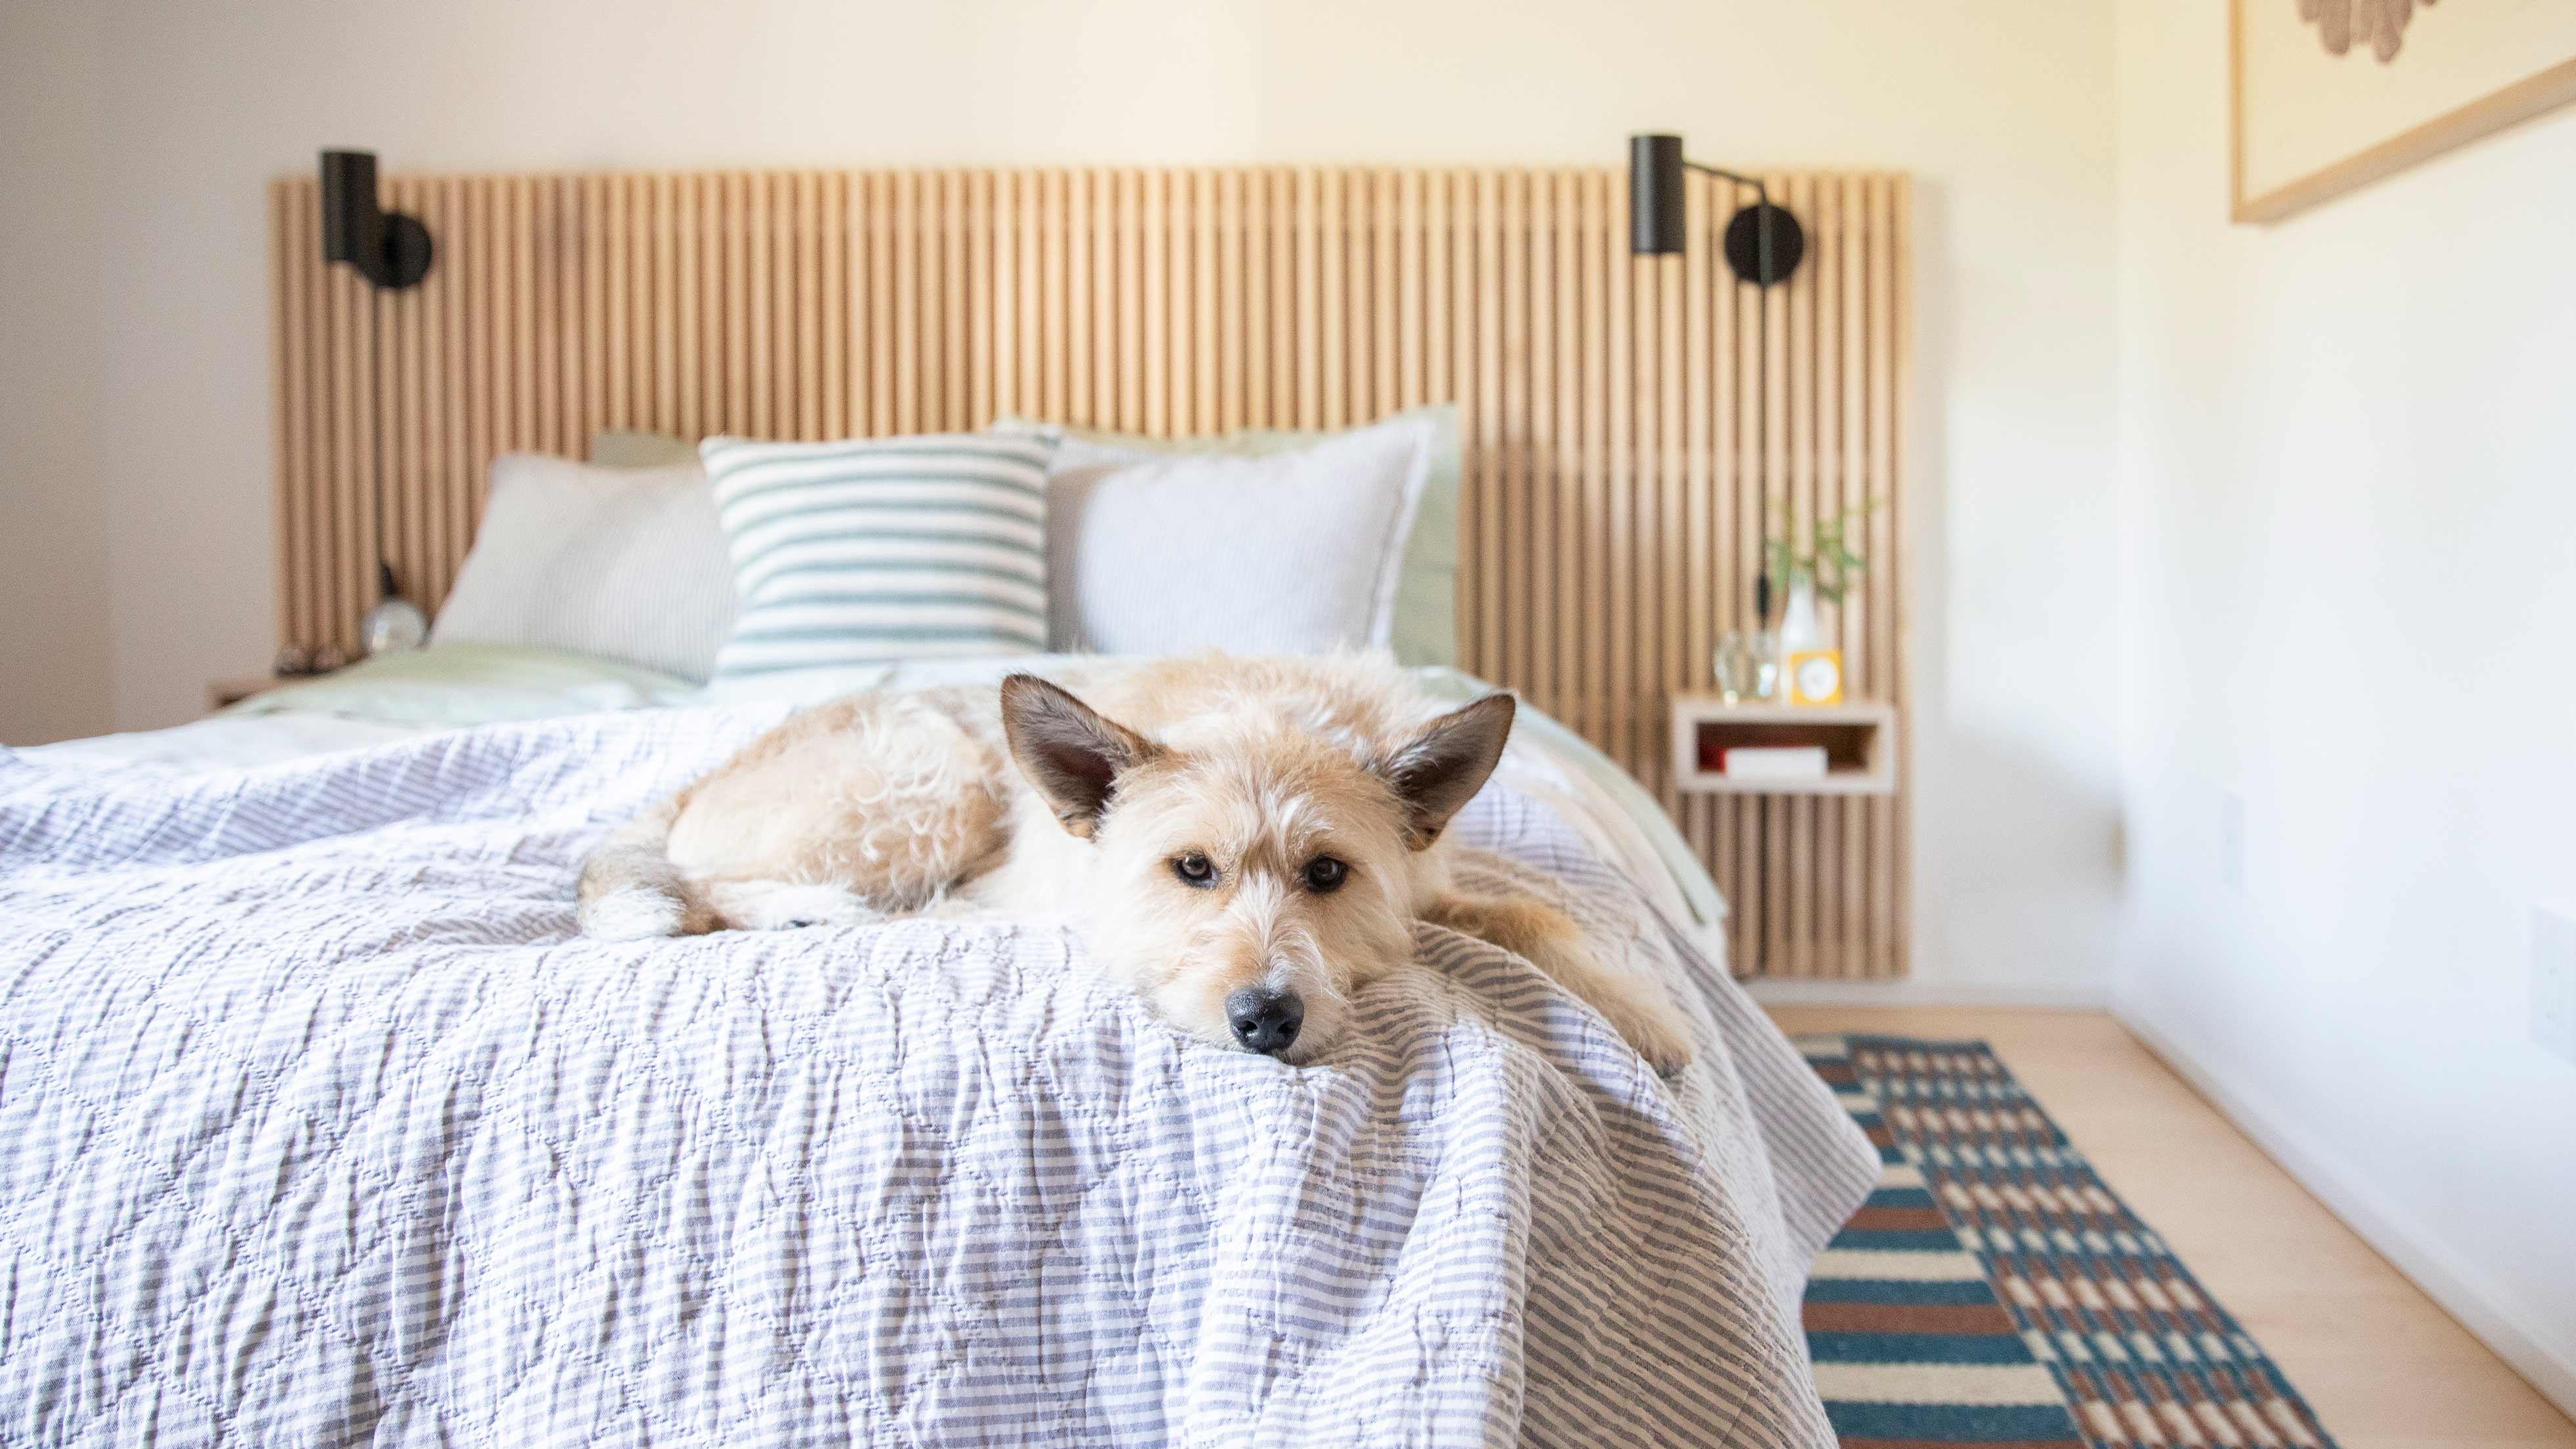 Cute puppy on a cozy styled bed